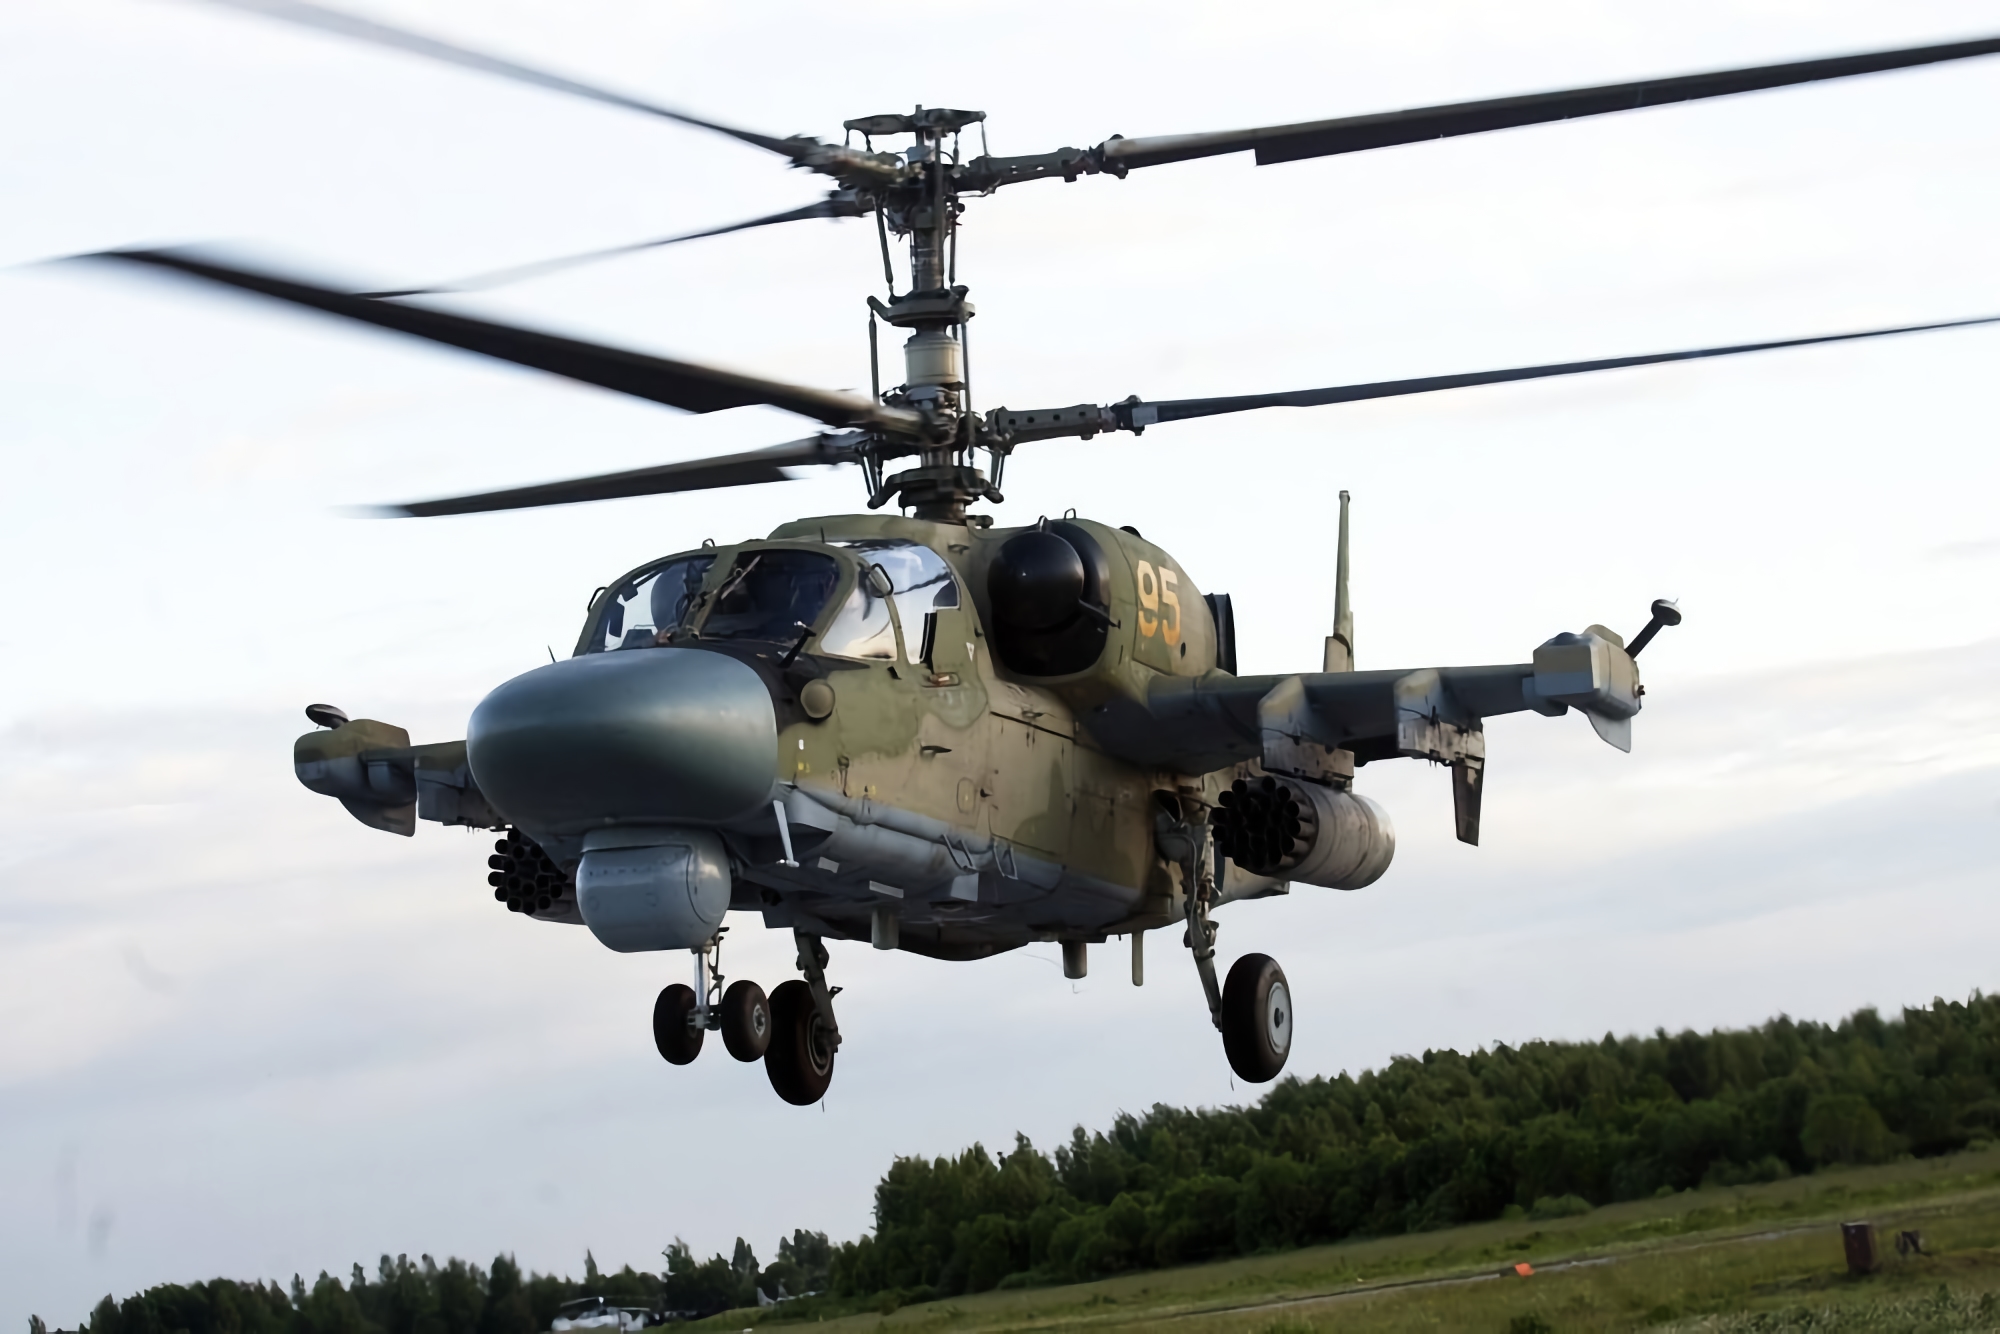 Minus $16,000,000: AFU shot down another advanced Russian Ka-52 "Alligator" helicopter